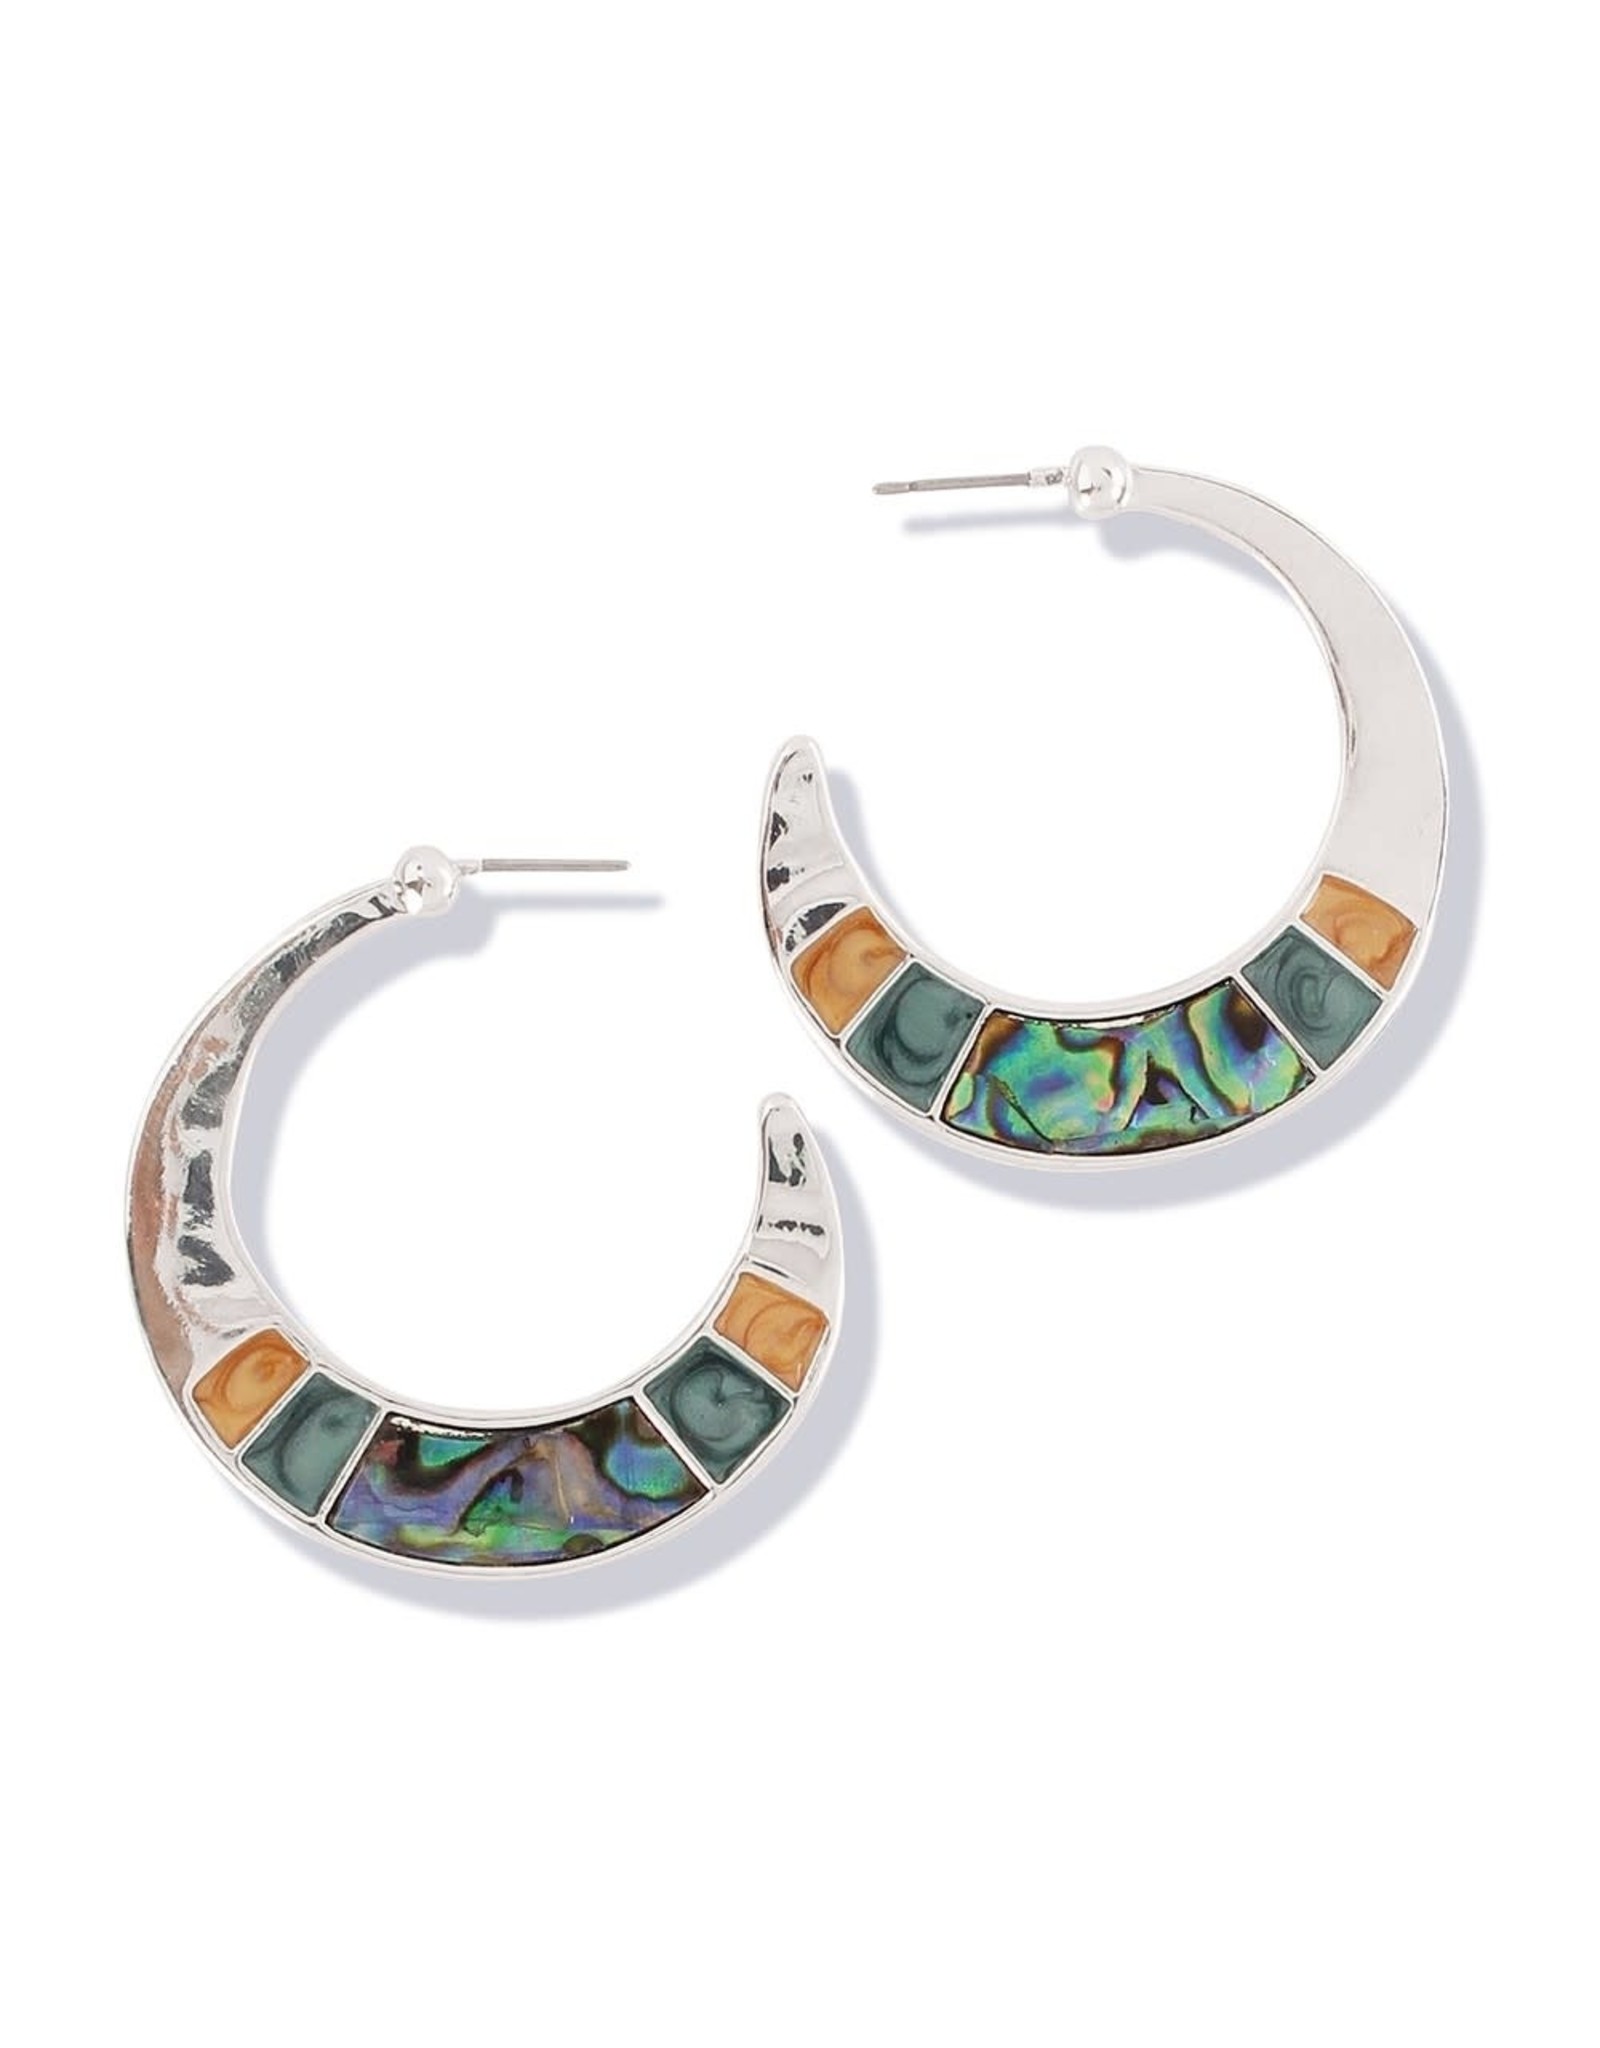 Periwinkle by Barlow Silver W Abalone And Enamel Inlay Earrings